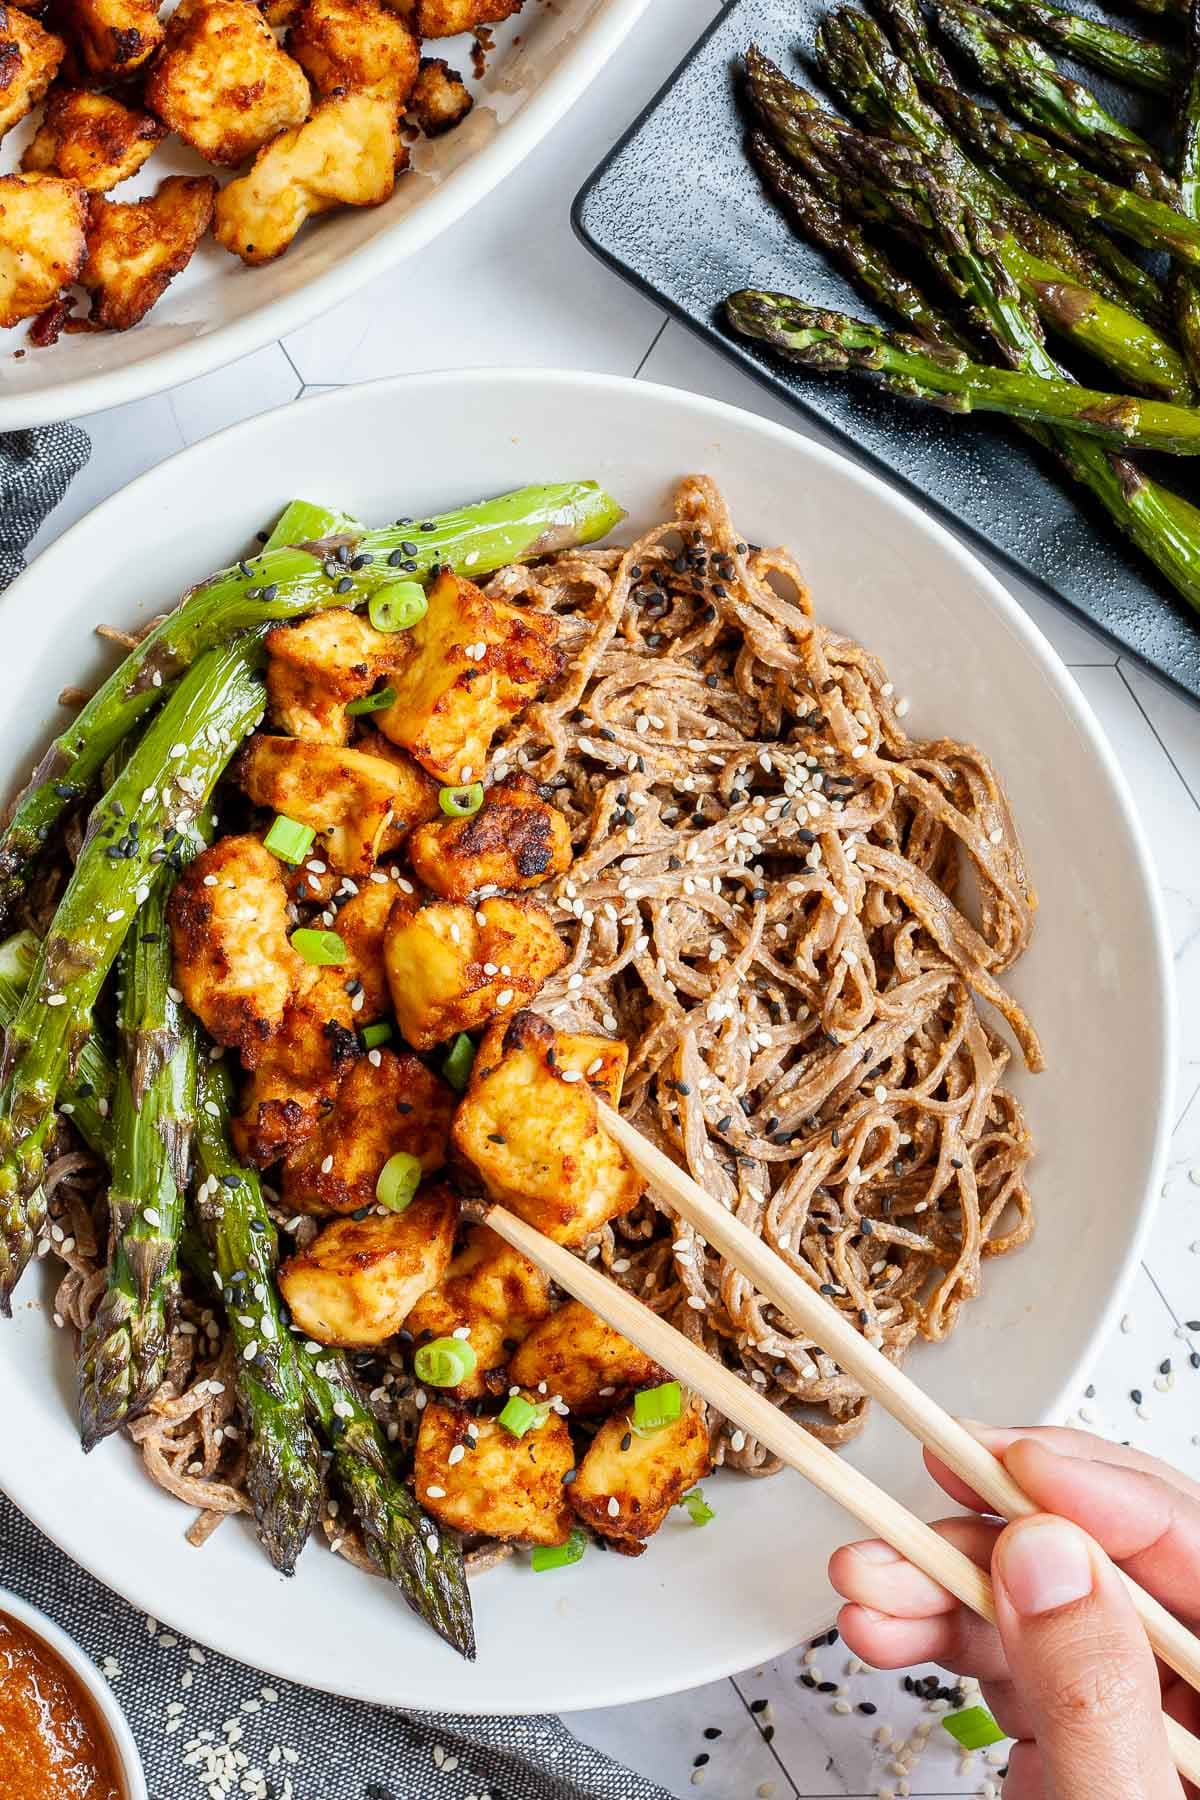 Large white bowl with brown soba noodles, orange crispy tofu bites, roasted asparagus and black and white sesame seeds. More asparagus and tofu bites are on the side. A hand is holding chopsticks and taking one tofu.